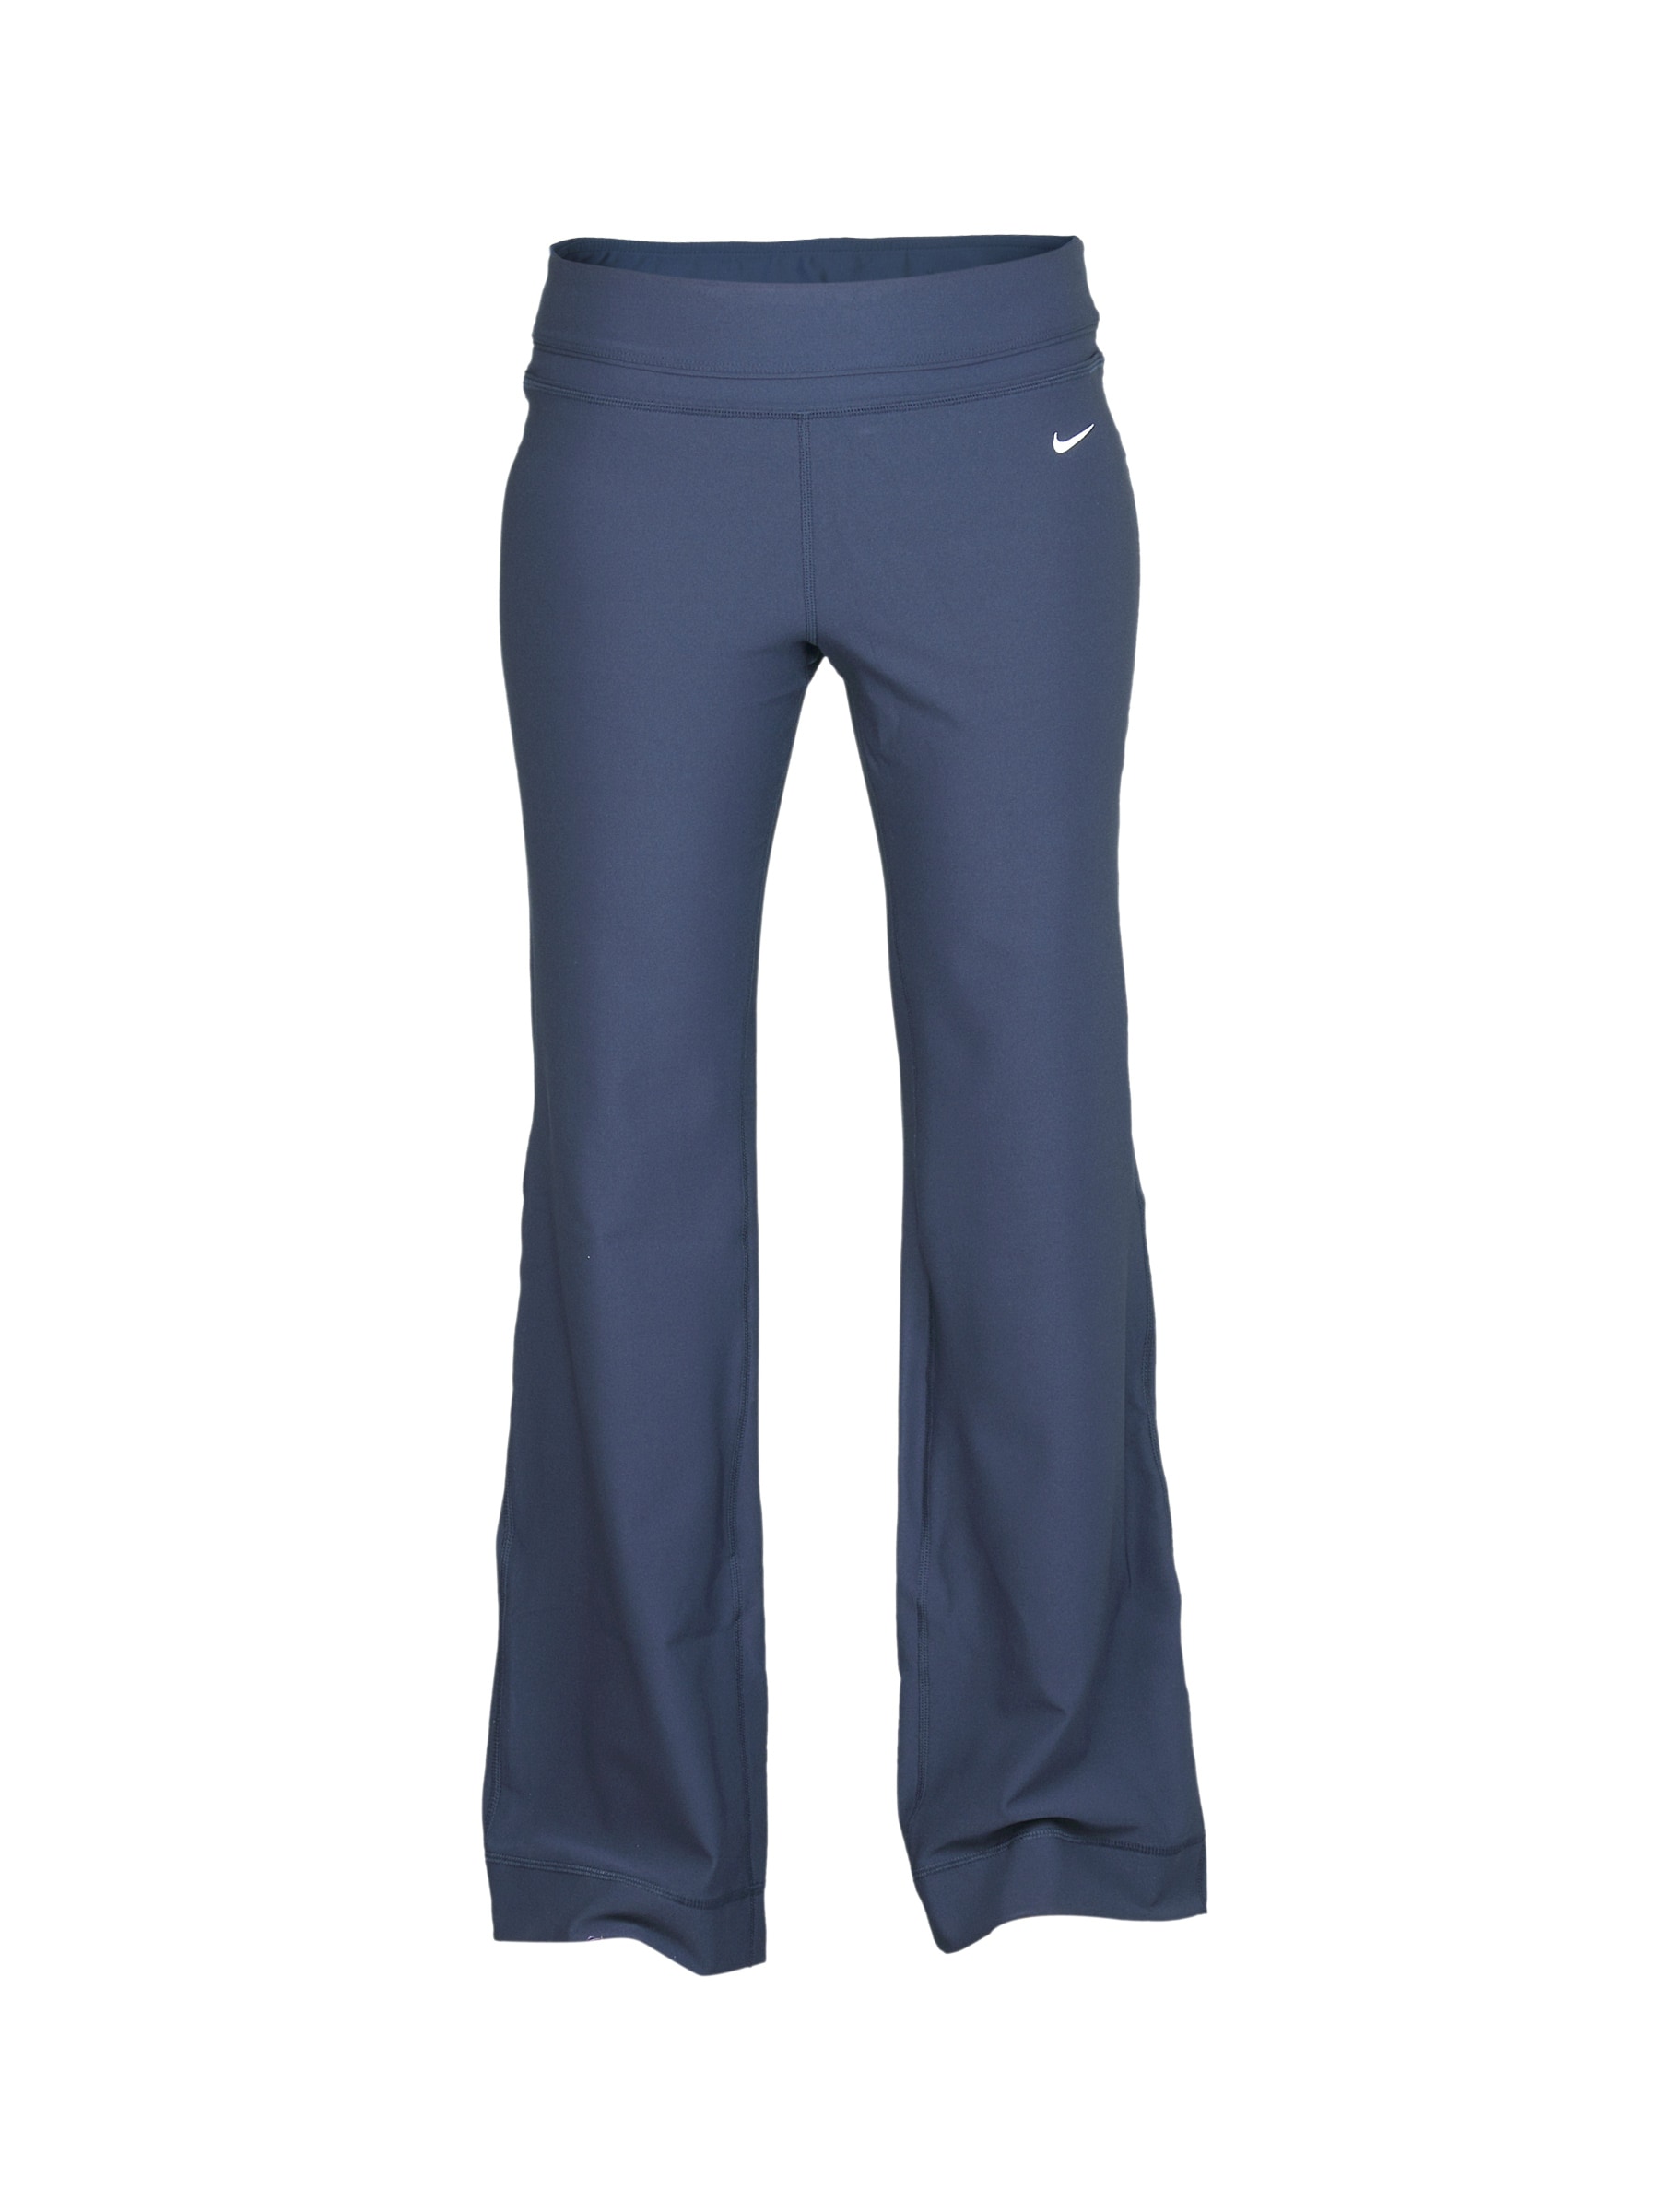 Nike Women Be Strong Navy Blue Pant